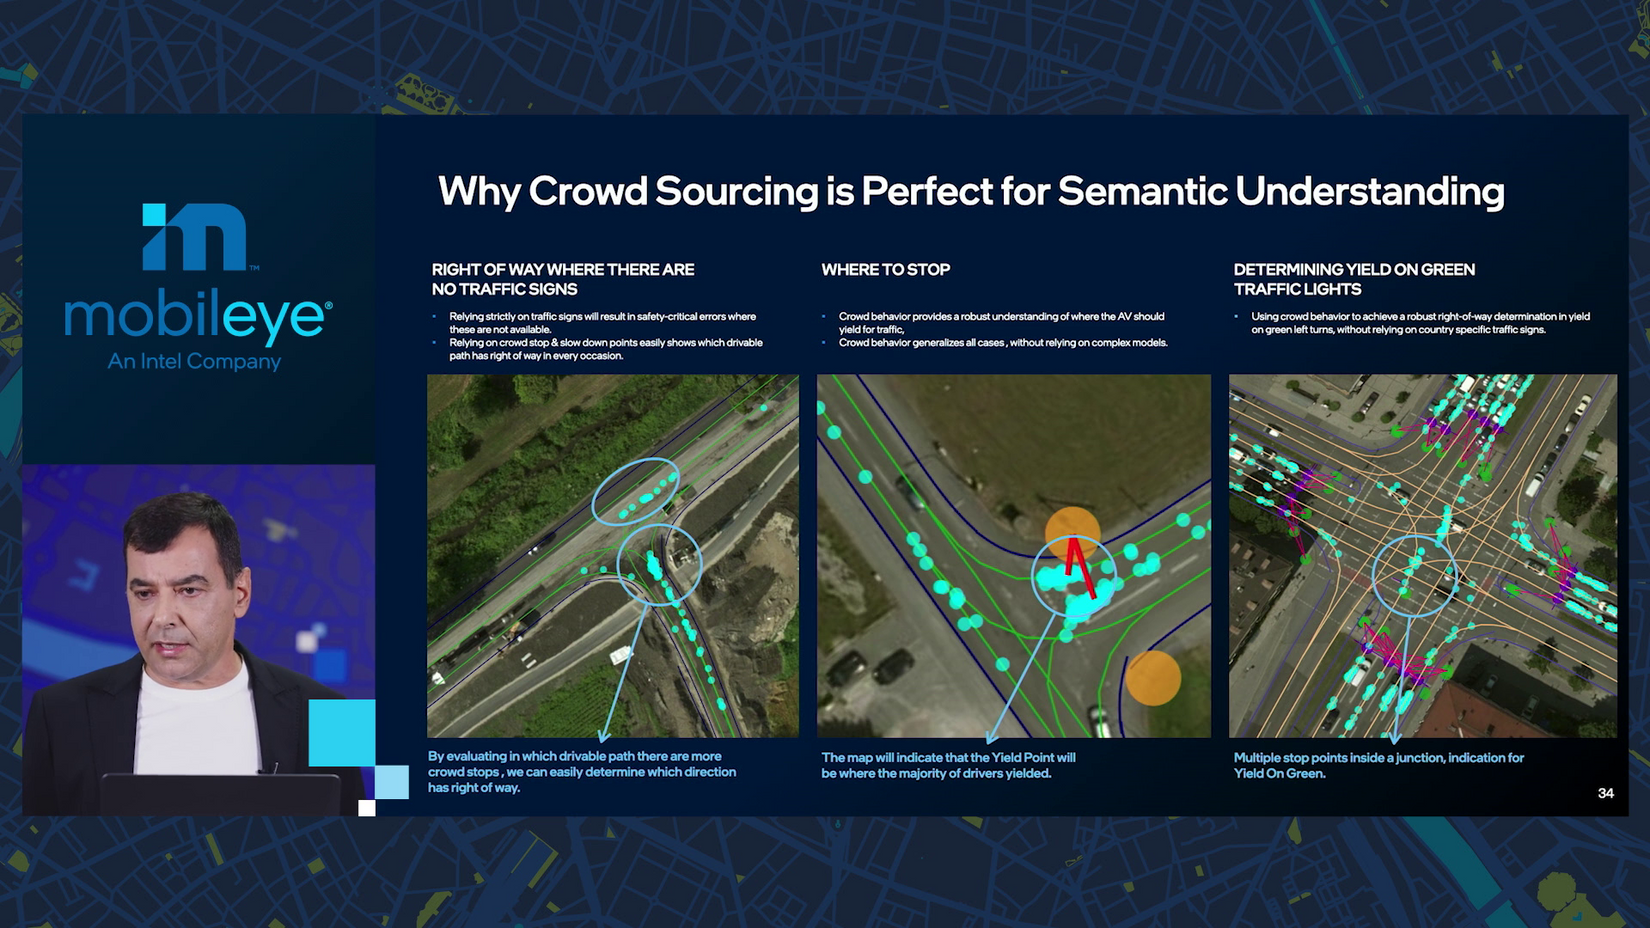 Why crowd sourcing is perfect for semantic understanding? Part 2